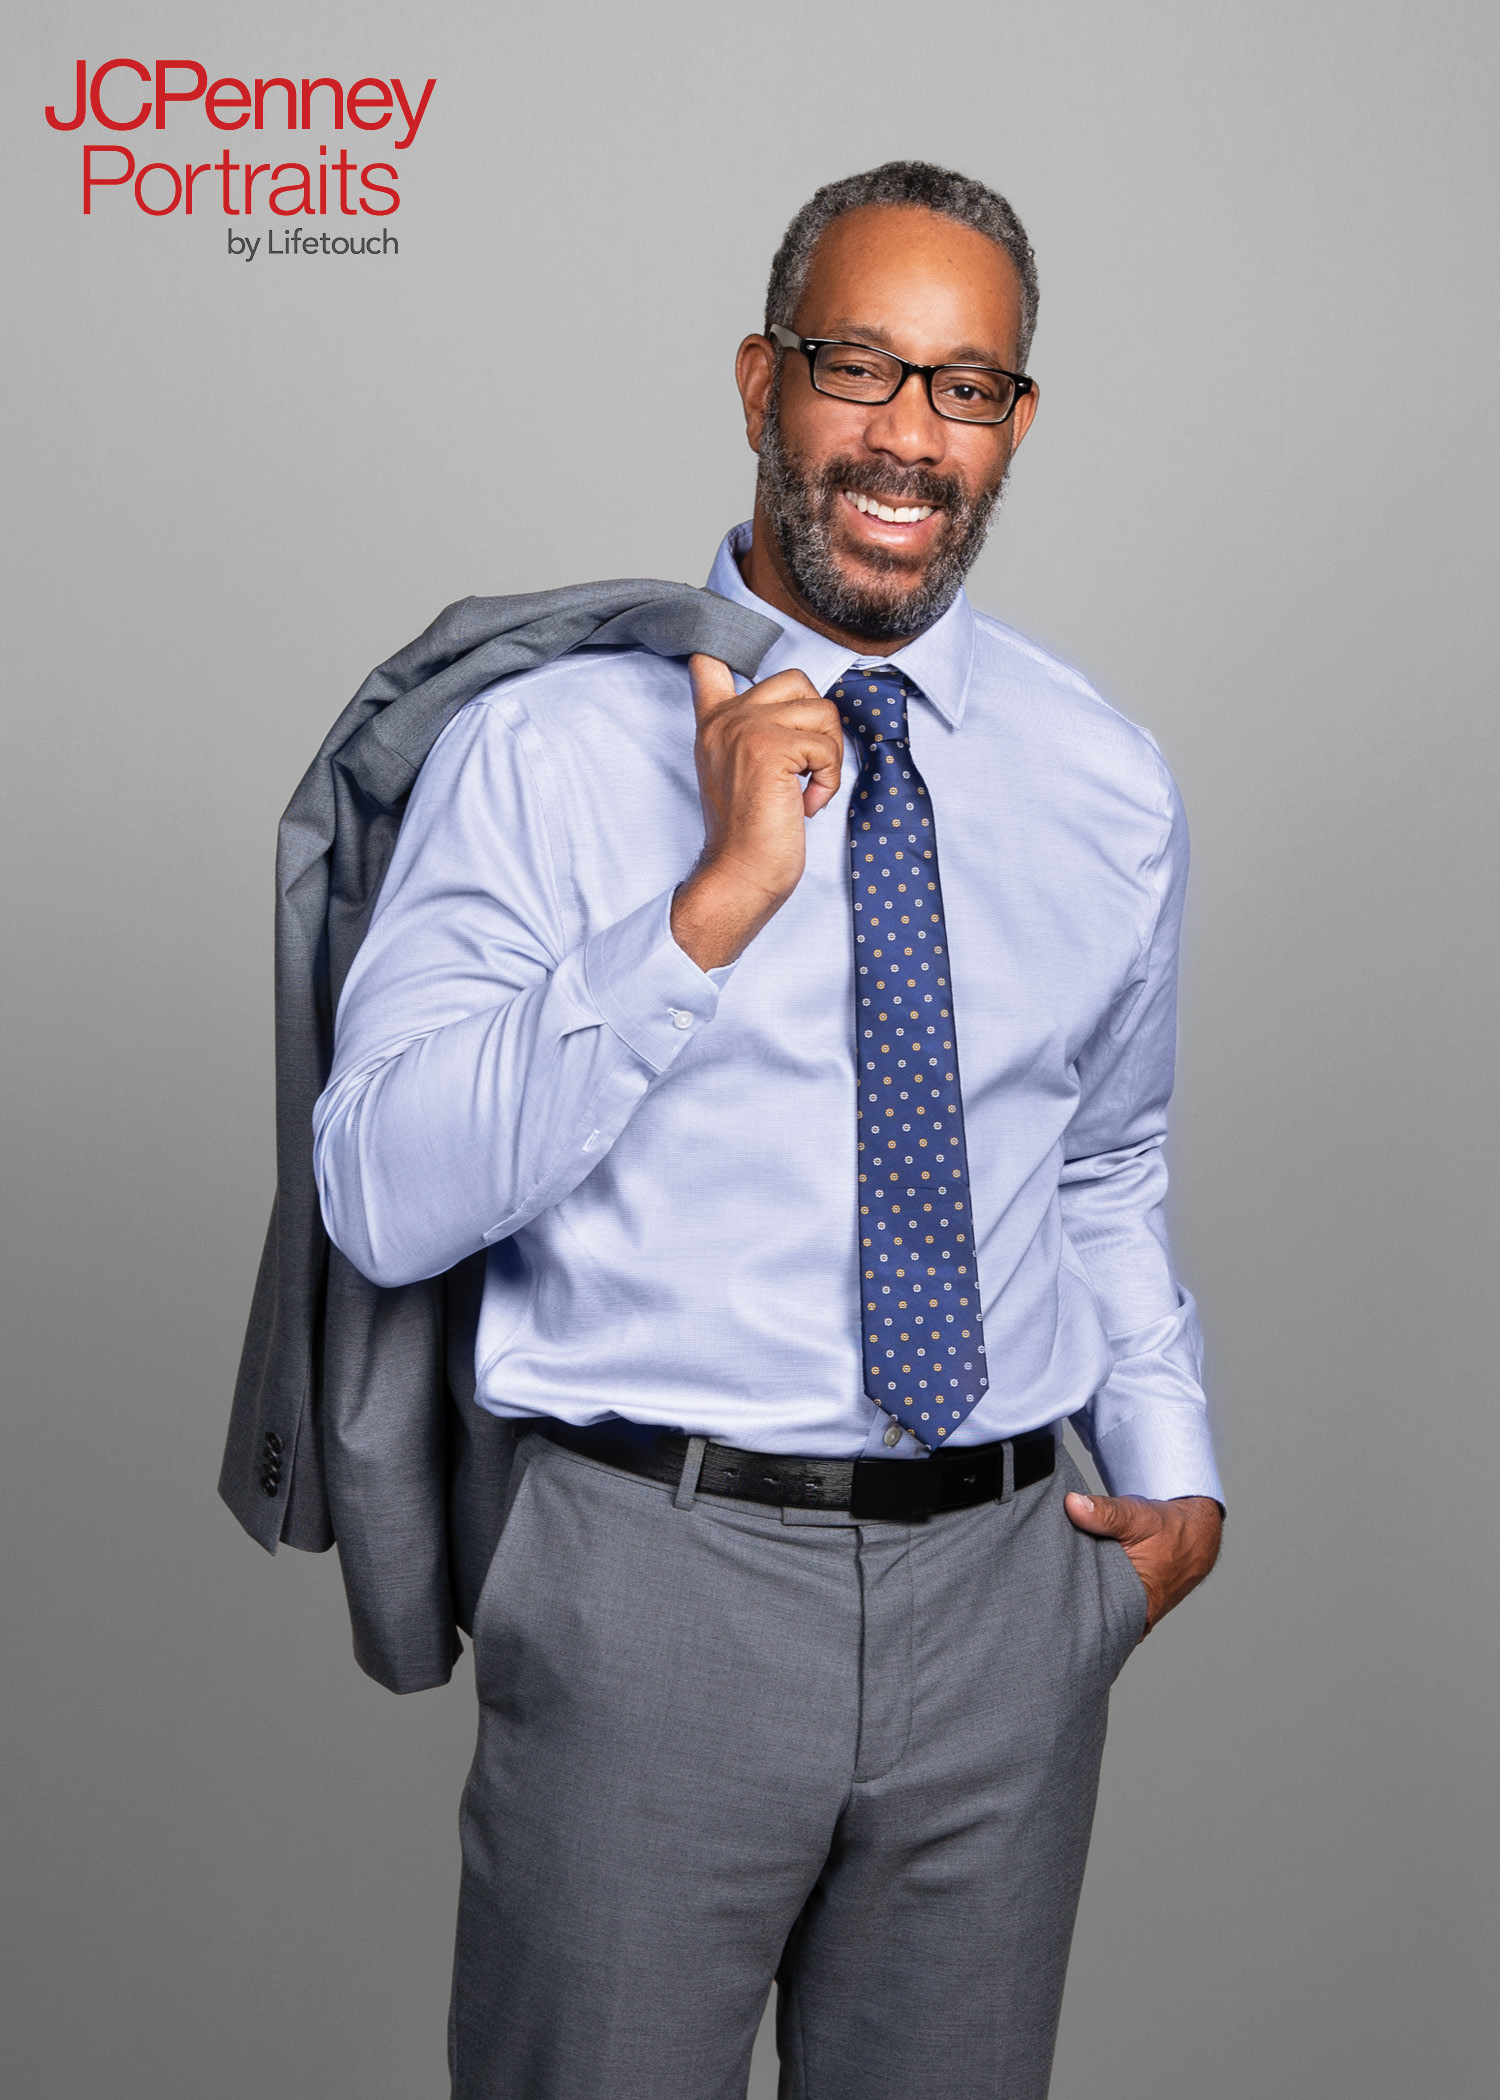 JCPenney Announces Snapshot for Success for Customers to Unlock Opportunity  with a Free Professional Headshot